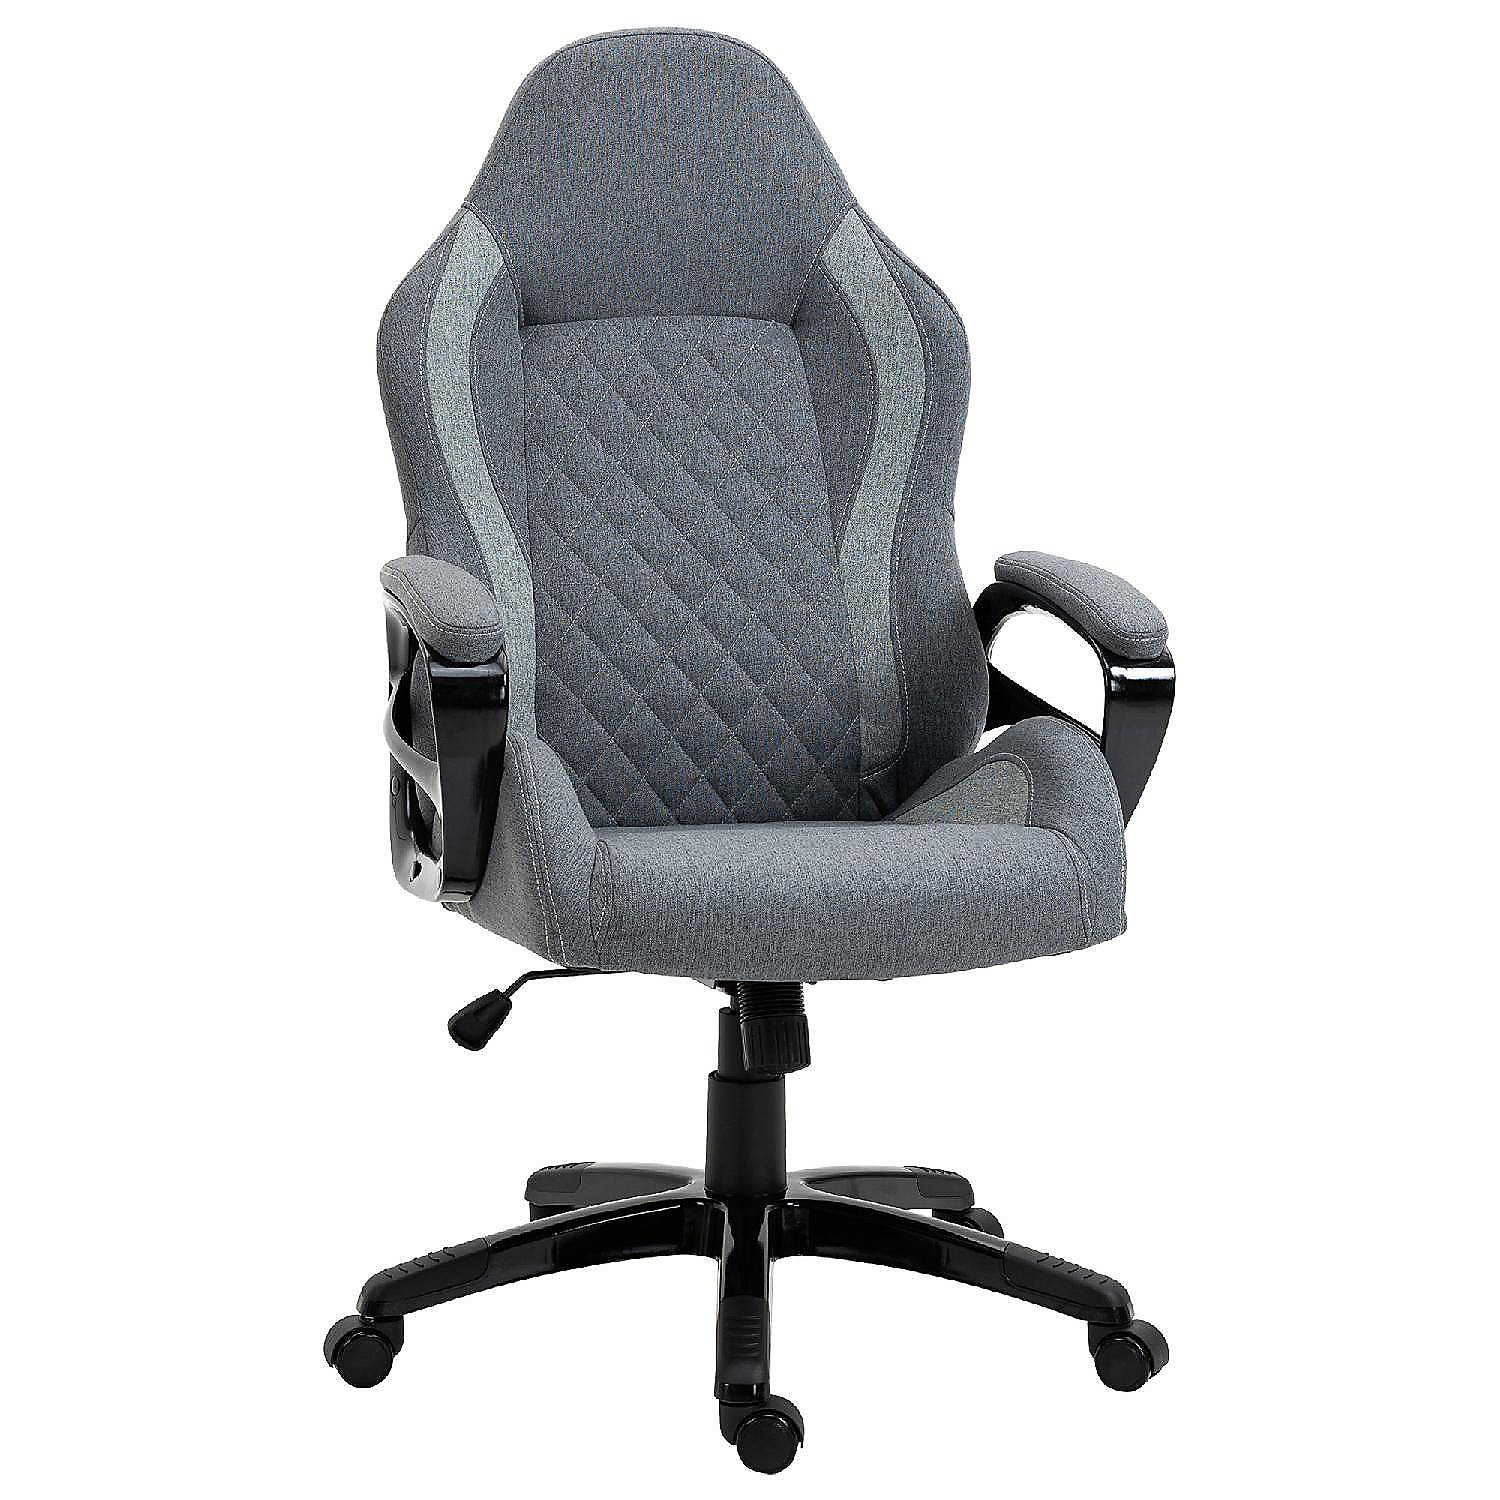 Grey Desk Chair,PU Leather Computer Swivel Chair Adjustable Height Comfy Office Chair Padded Study Chair,Home/Office Furniture 